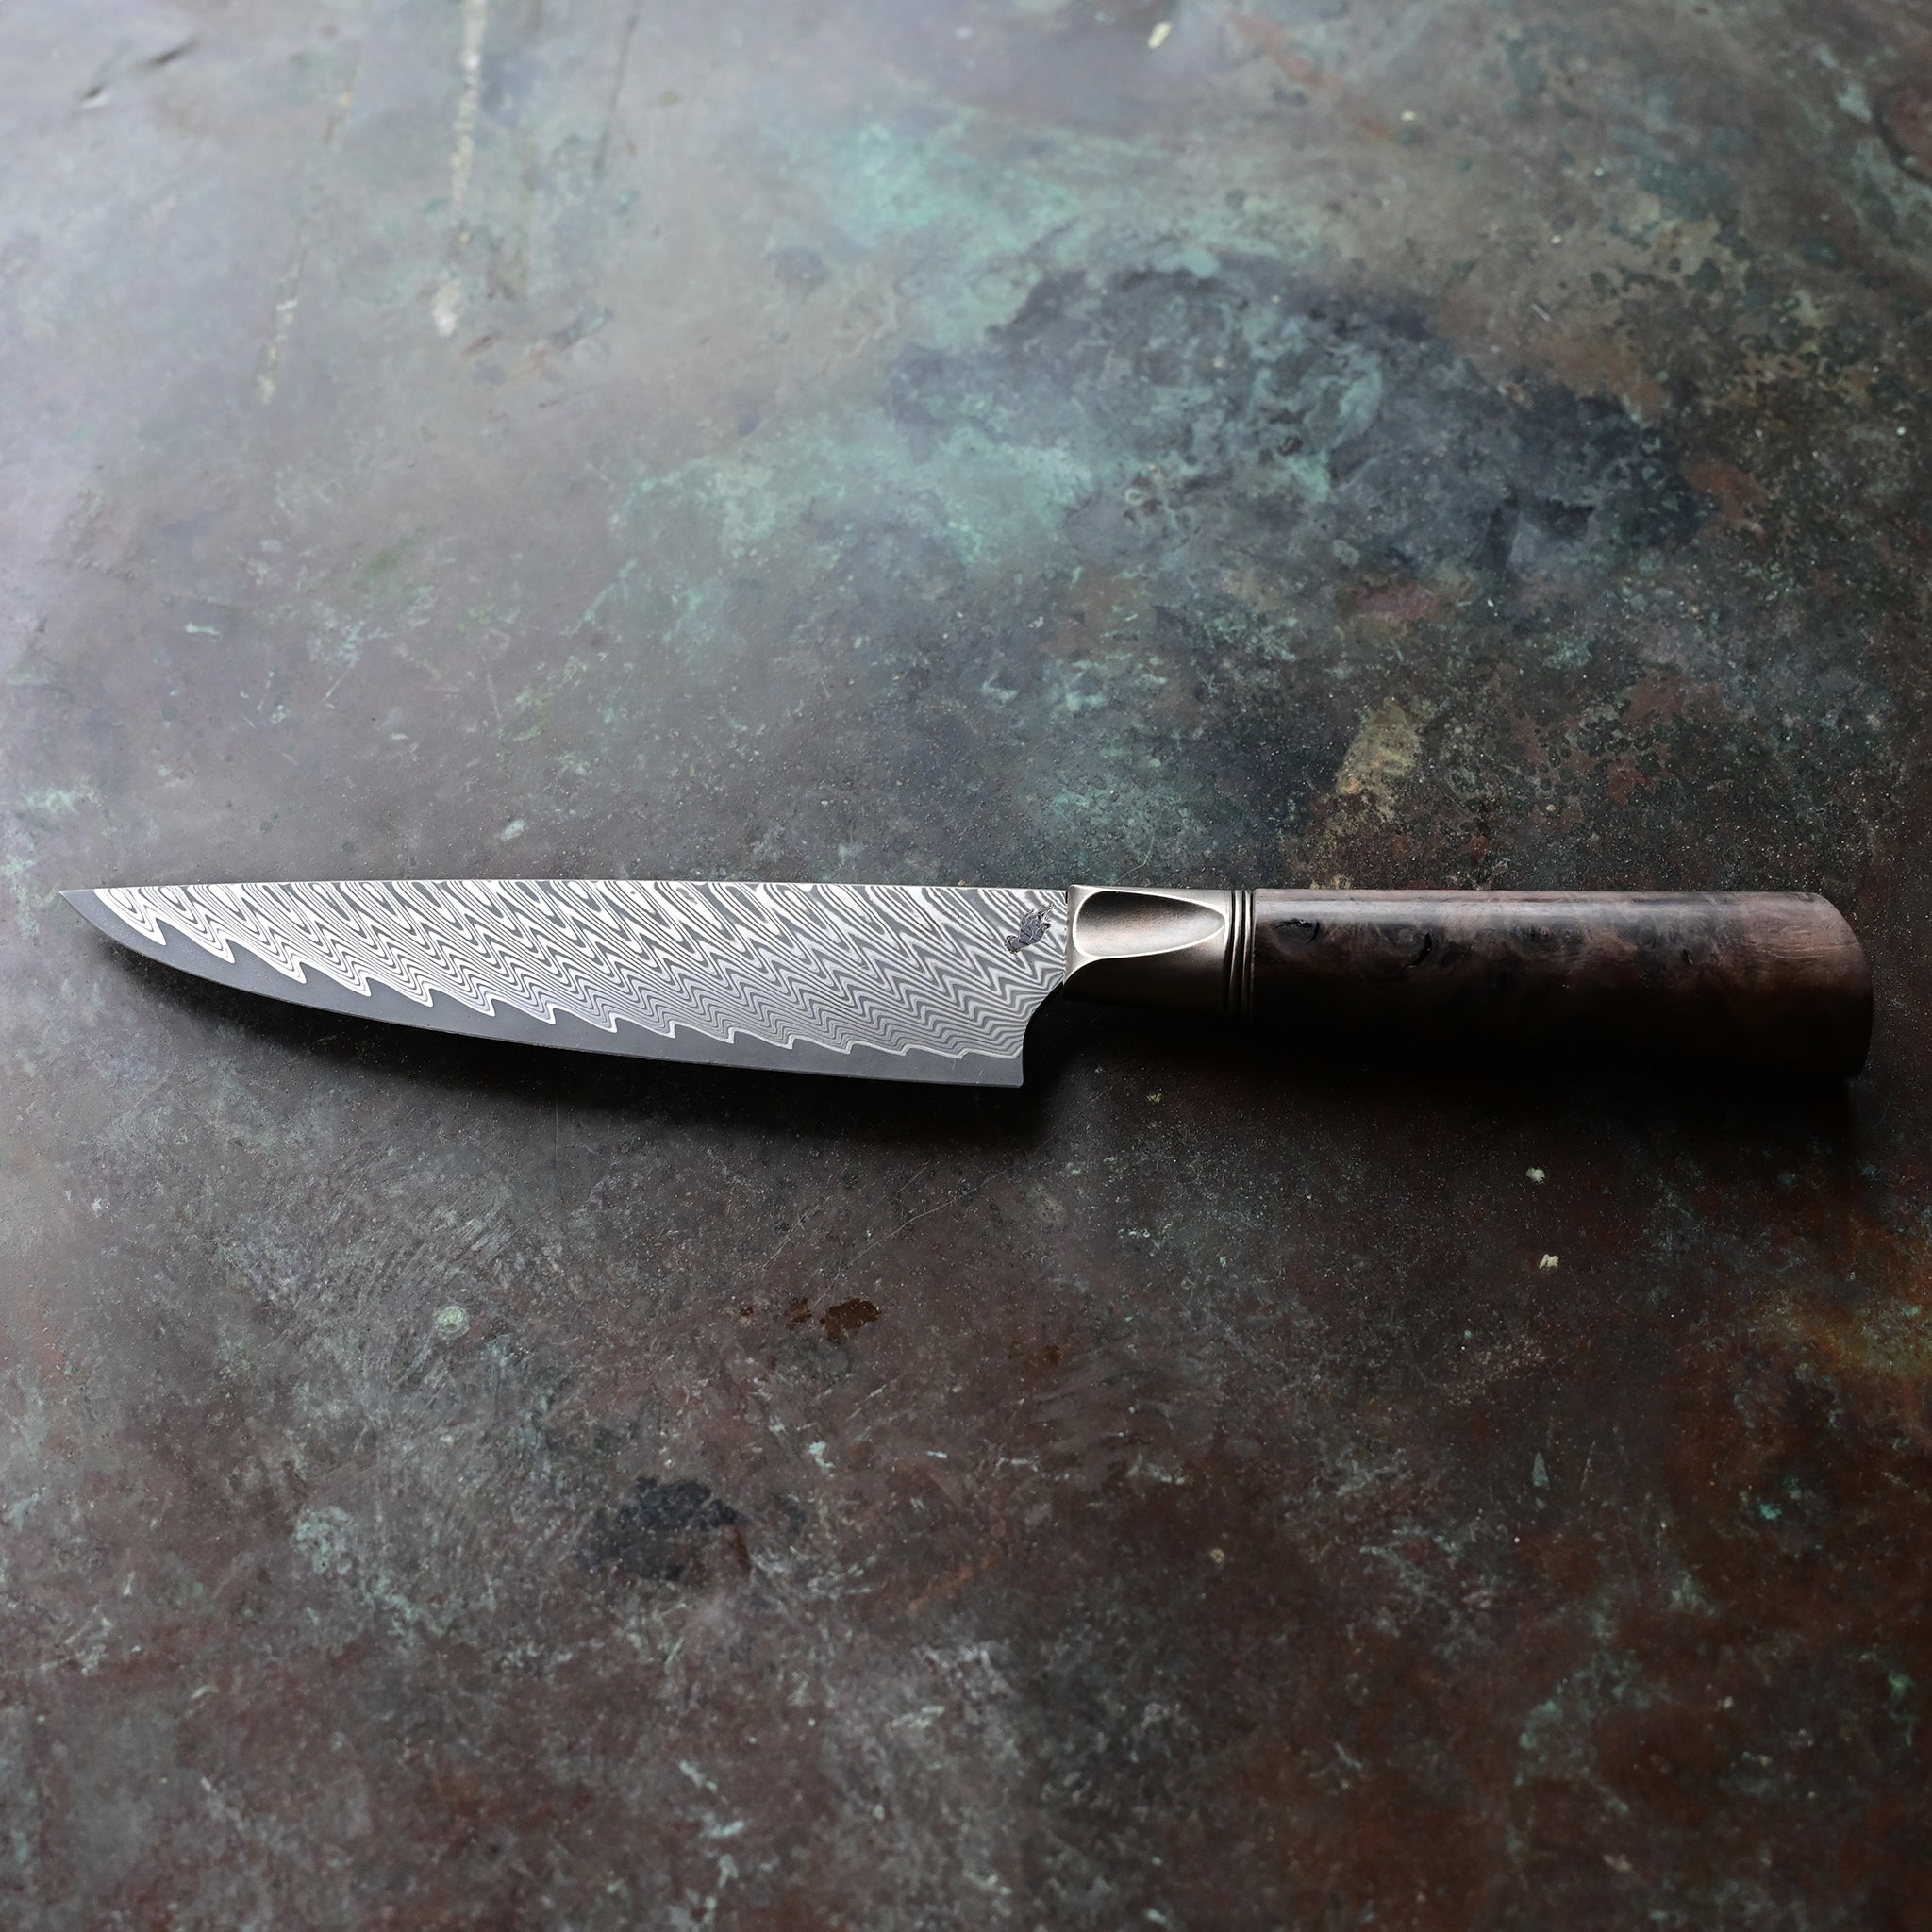 Distinctive 6.5" cutting edge petty knife on a concrete surface, showcasing a Zephyr Zigzag Damascus pattern, an aged bronze bolster, and a Claro walnut burl handle with rich brown and tan patterns